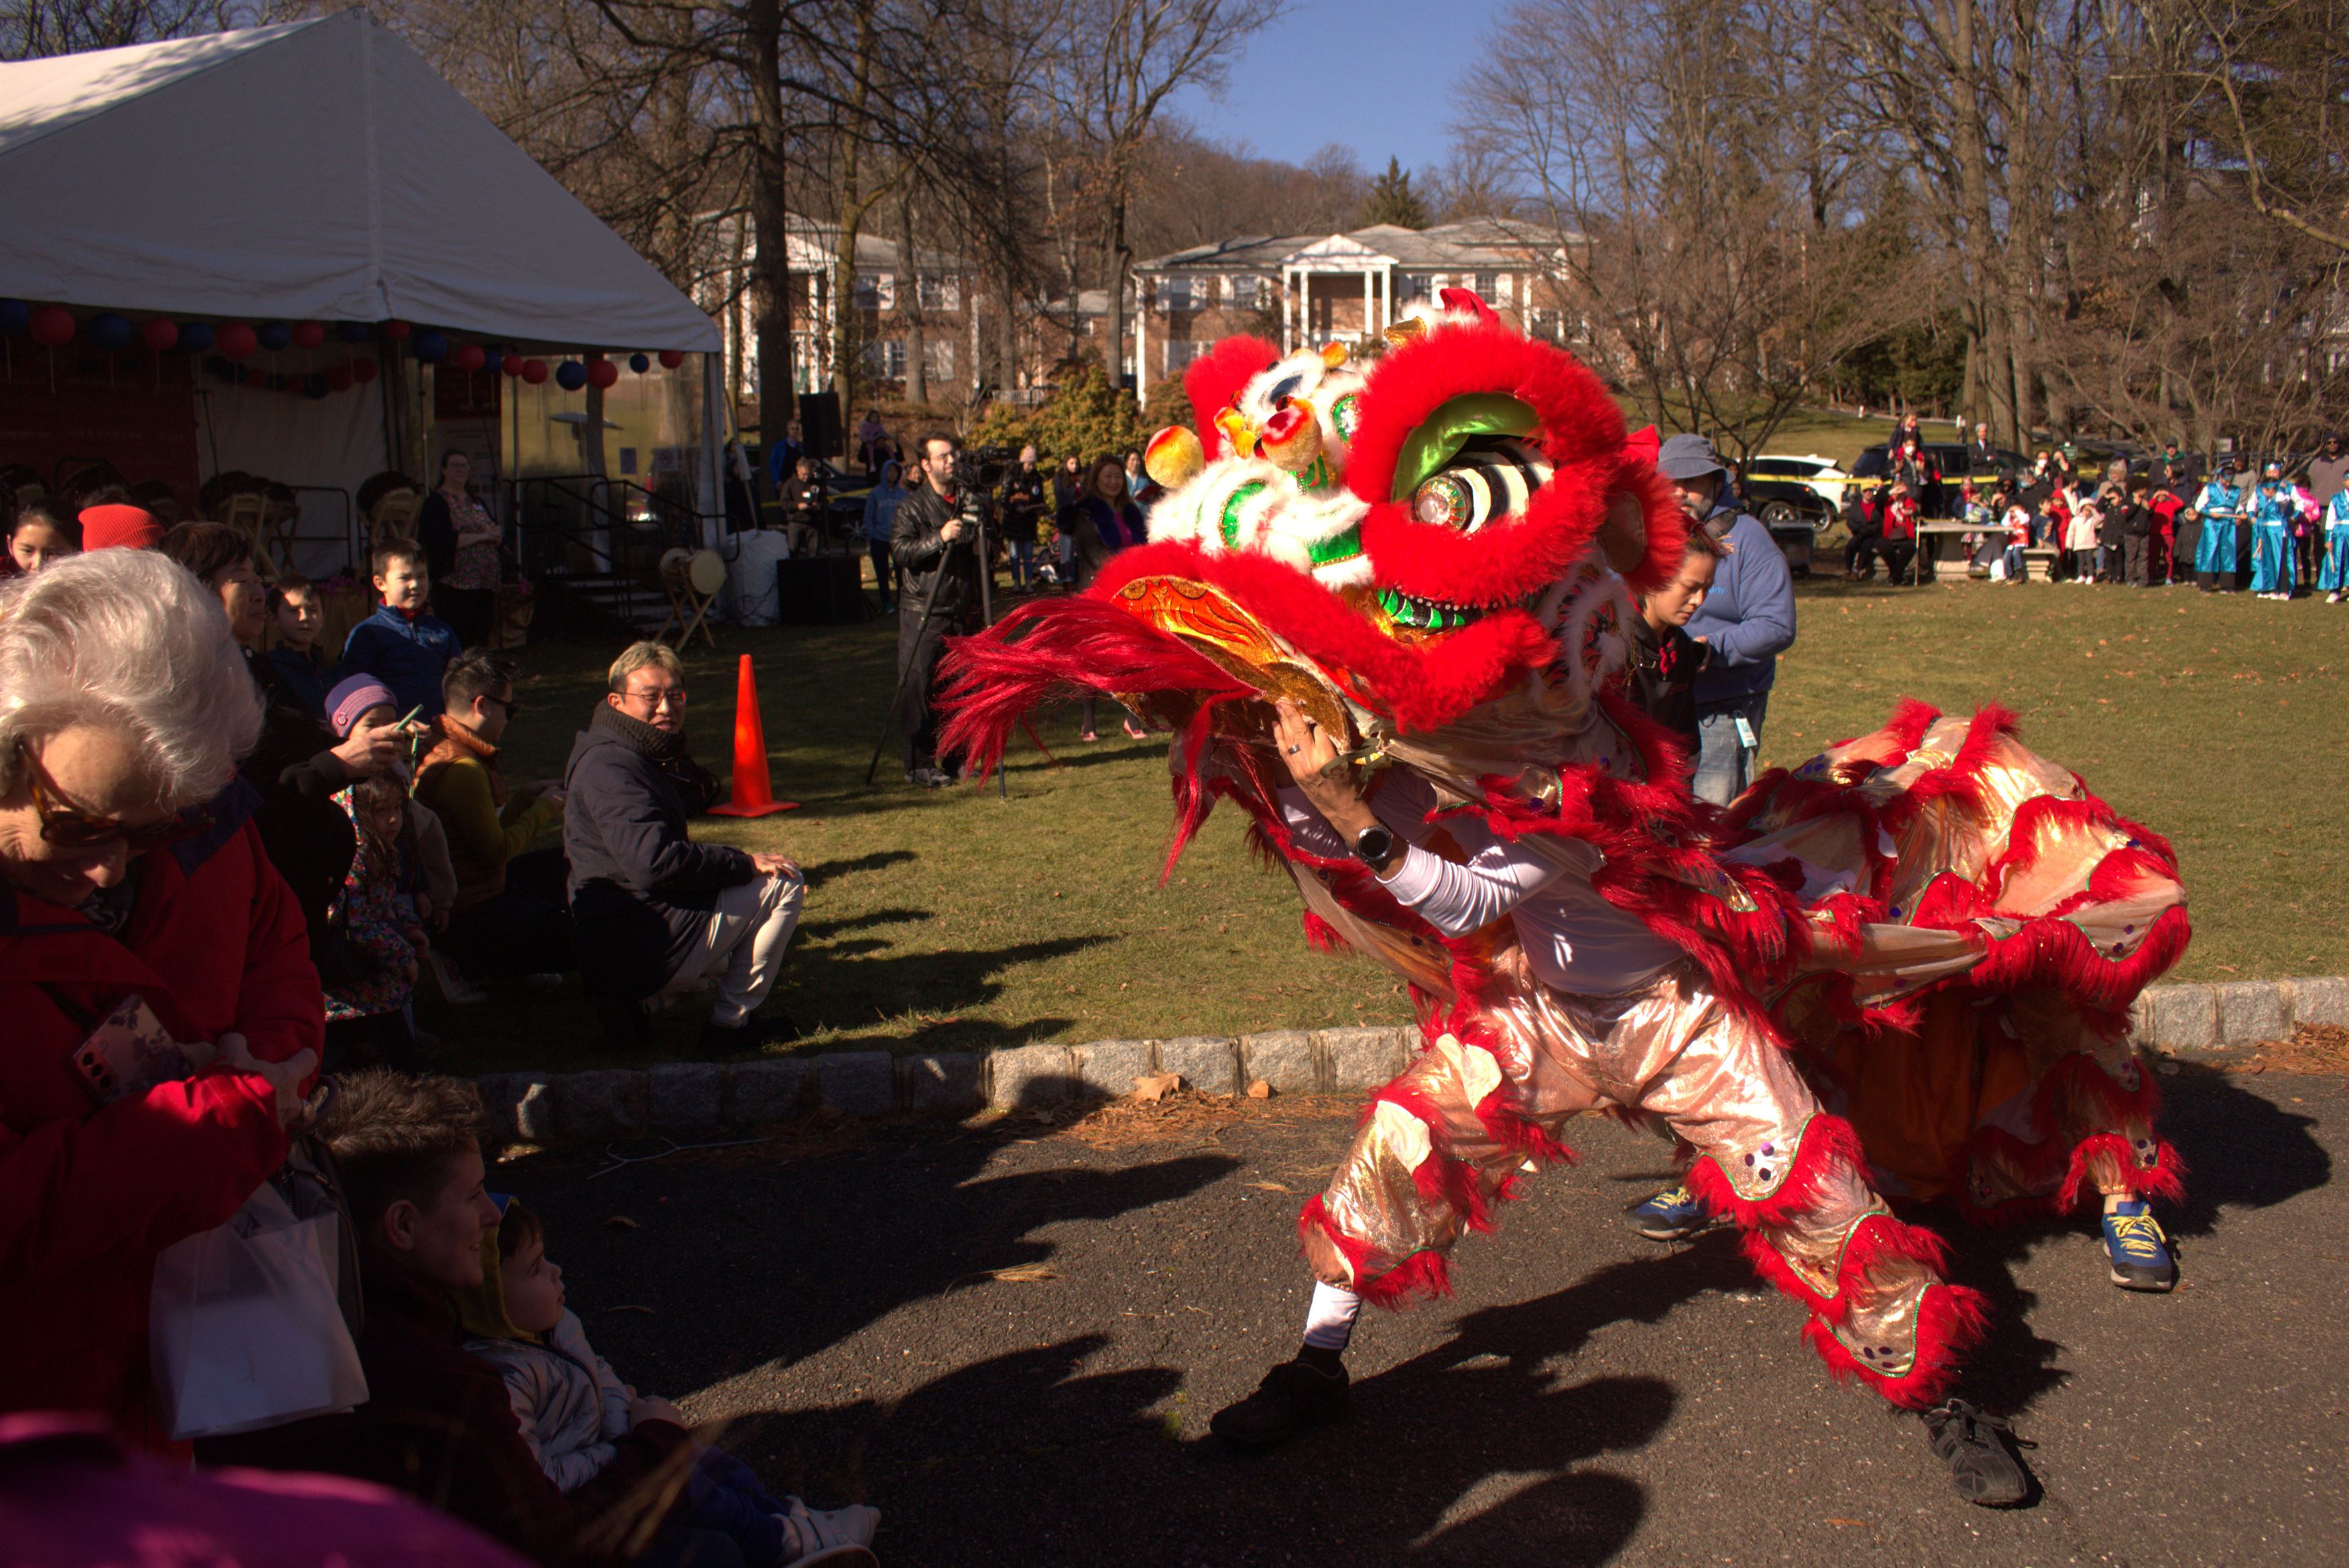 Onlookers watch as performers take part in the lion dance.
Sal DiMaggio | The Montclarion